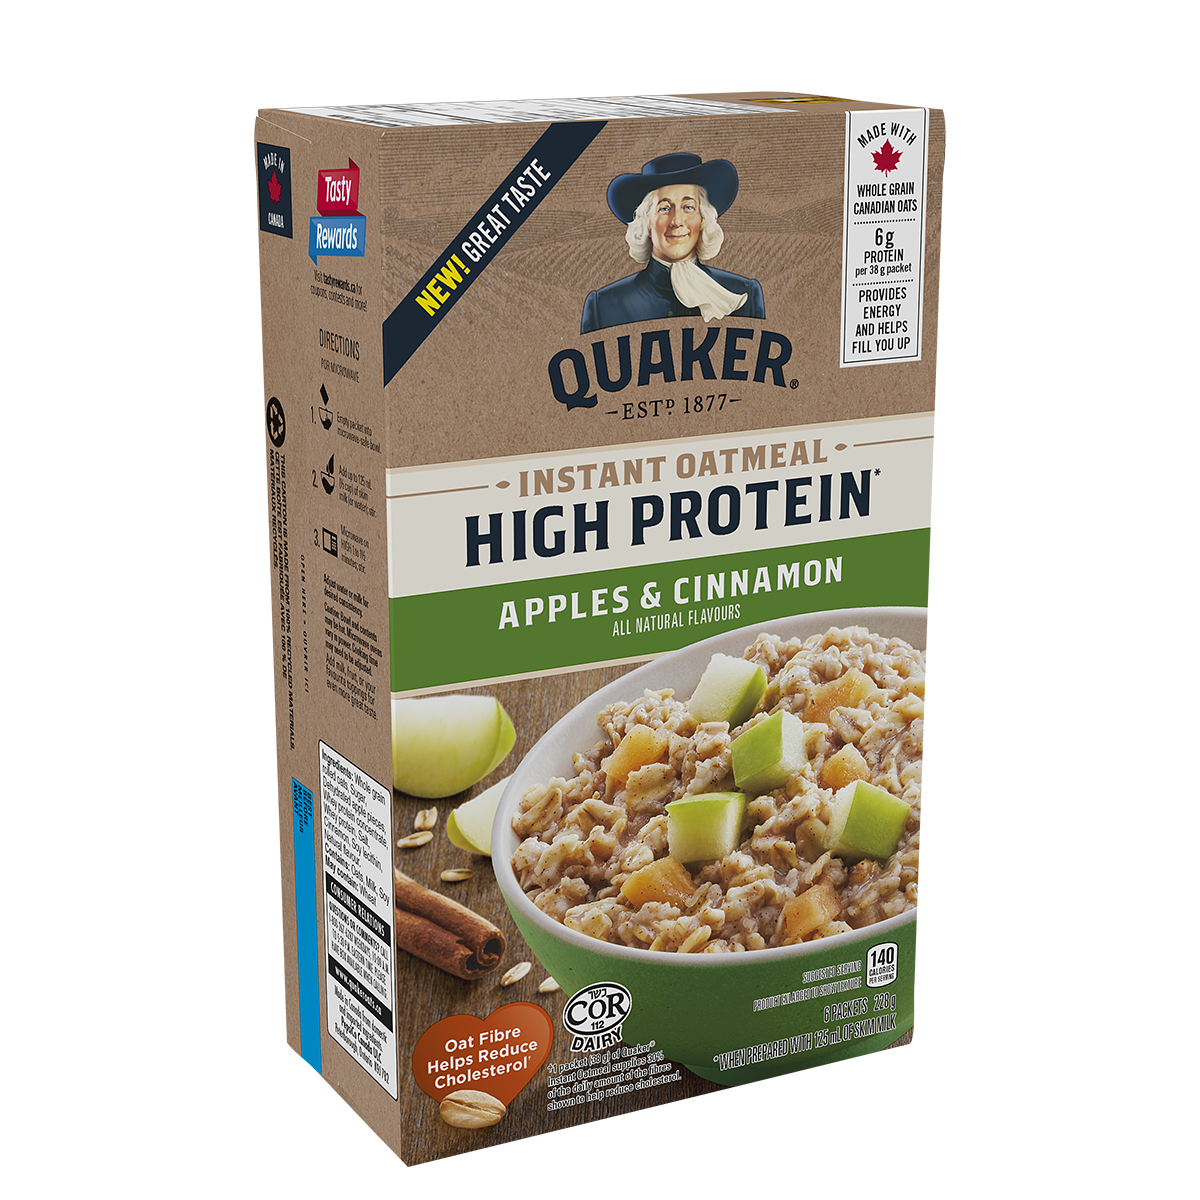 Quaker<sup>®</sup> High Protein Apples & Cinnamon Instant Oatmeal